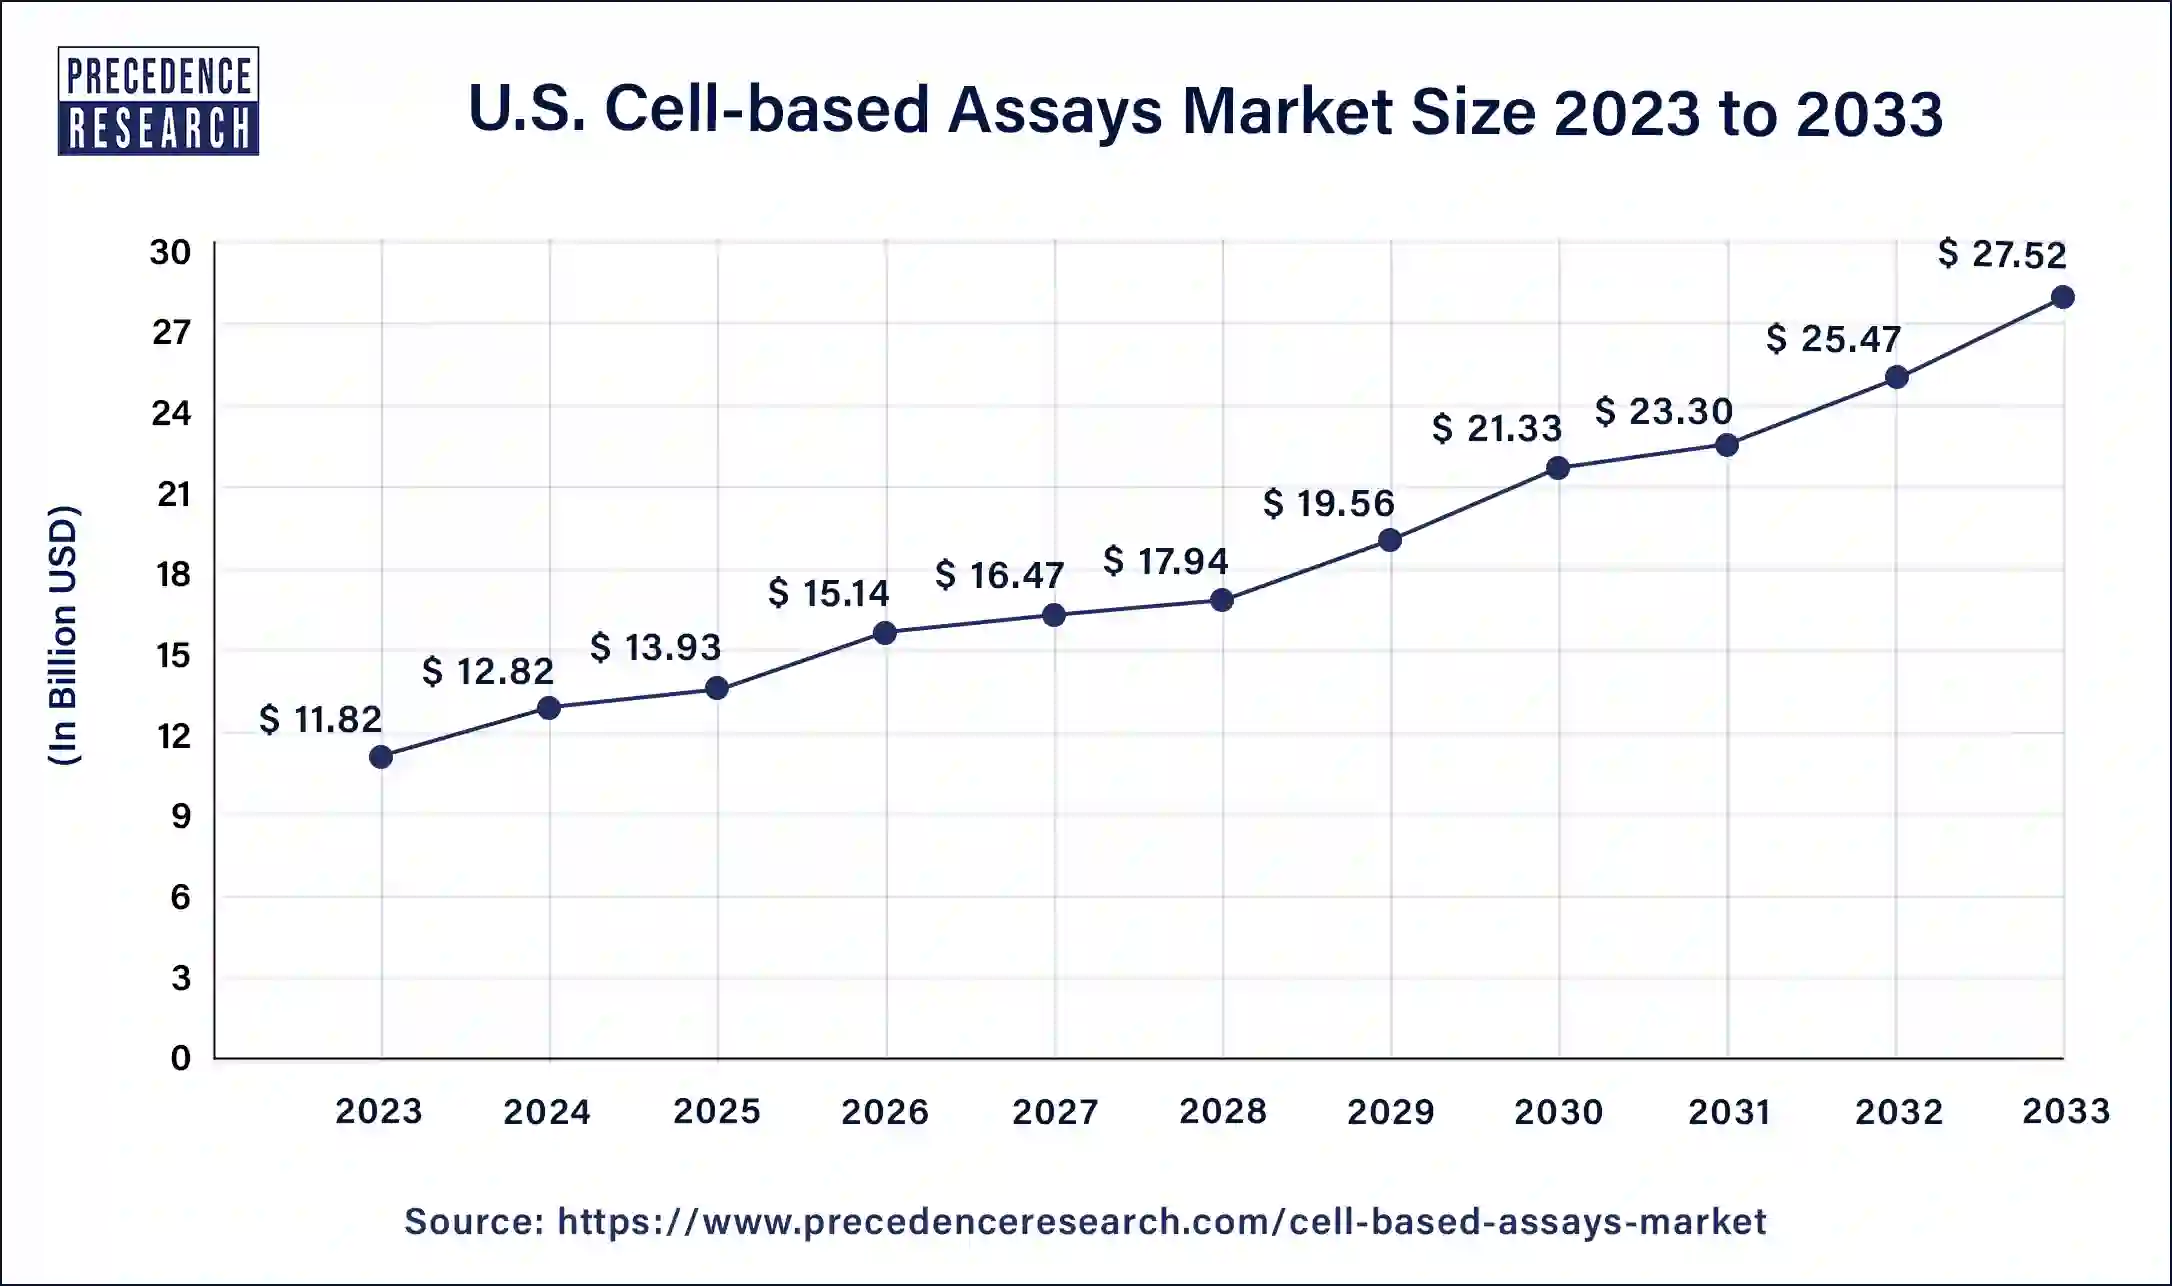 U.S. Cell-based Assays Market Size 2024 to 2033